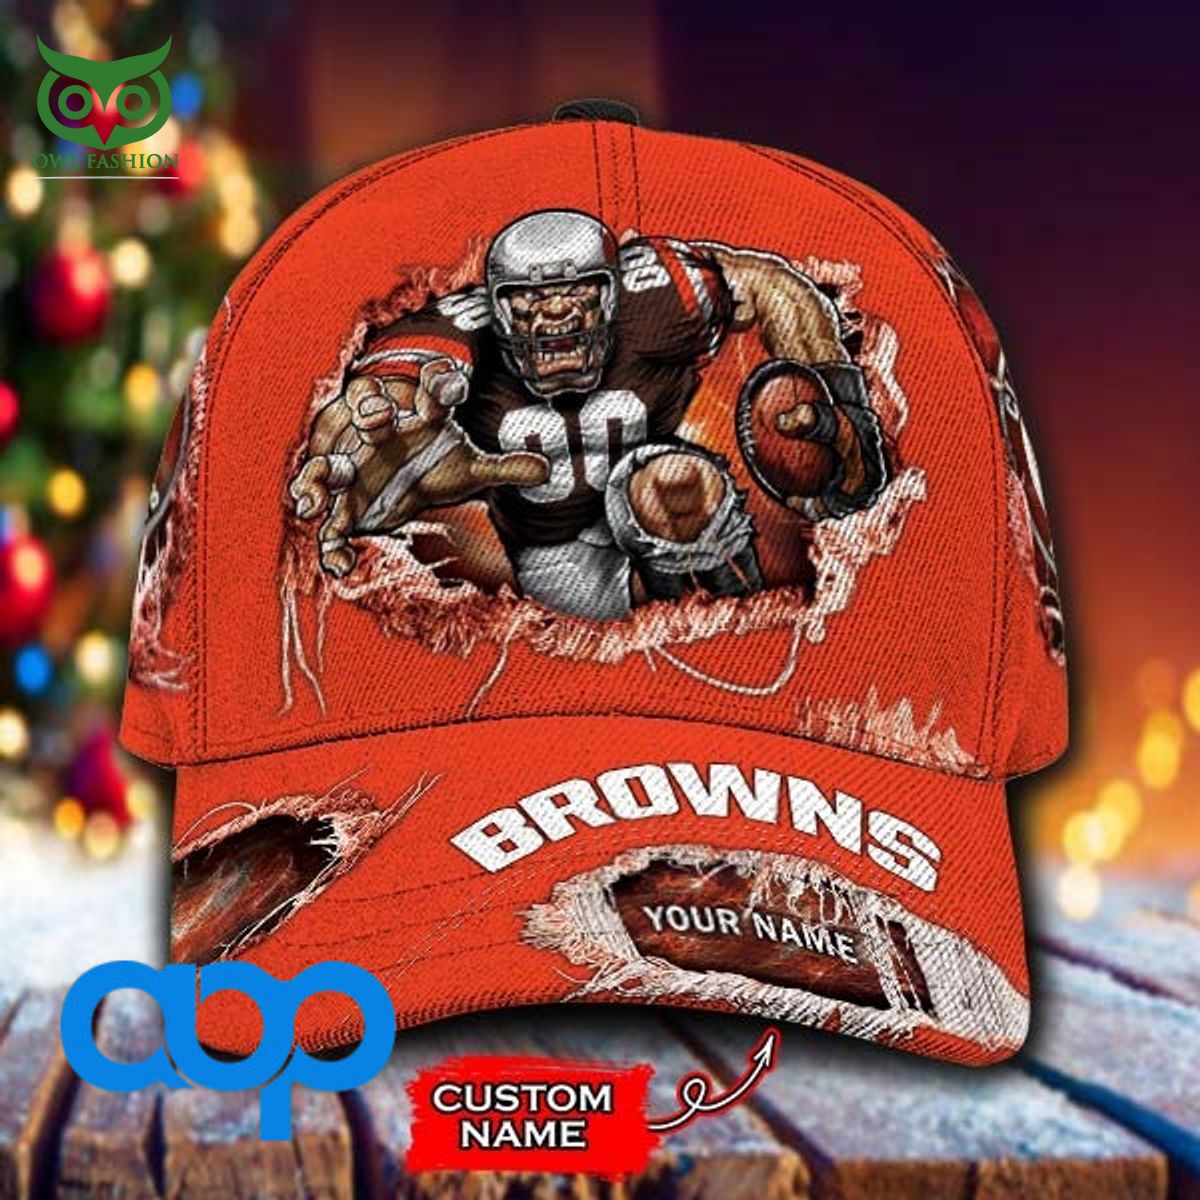 cleveland browns nfl new 2023 personalized printed classic cap 1 EbpN3